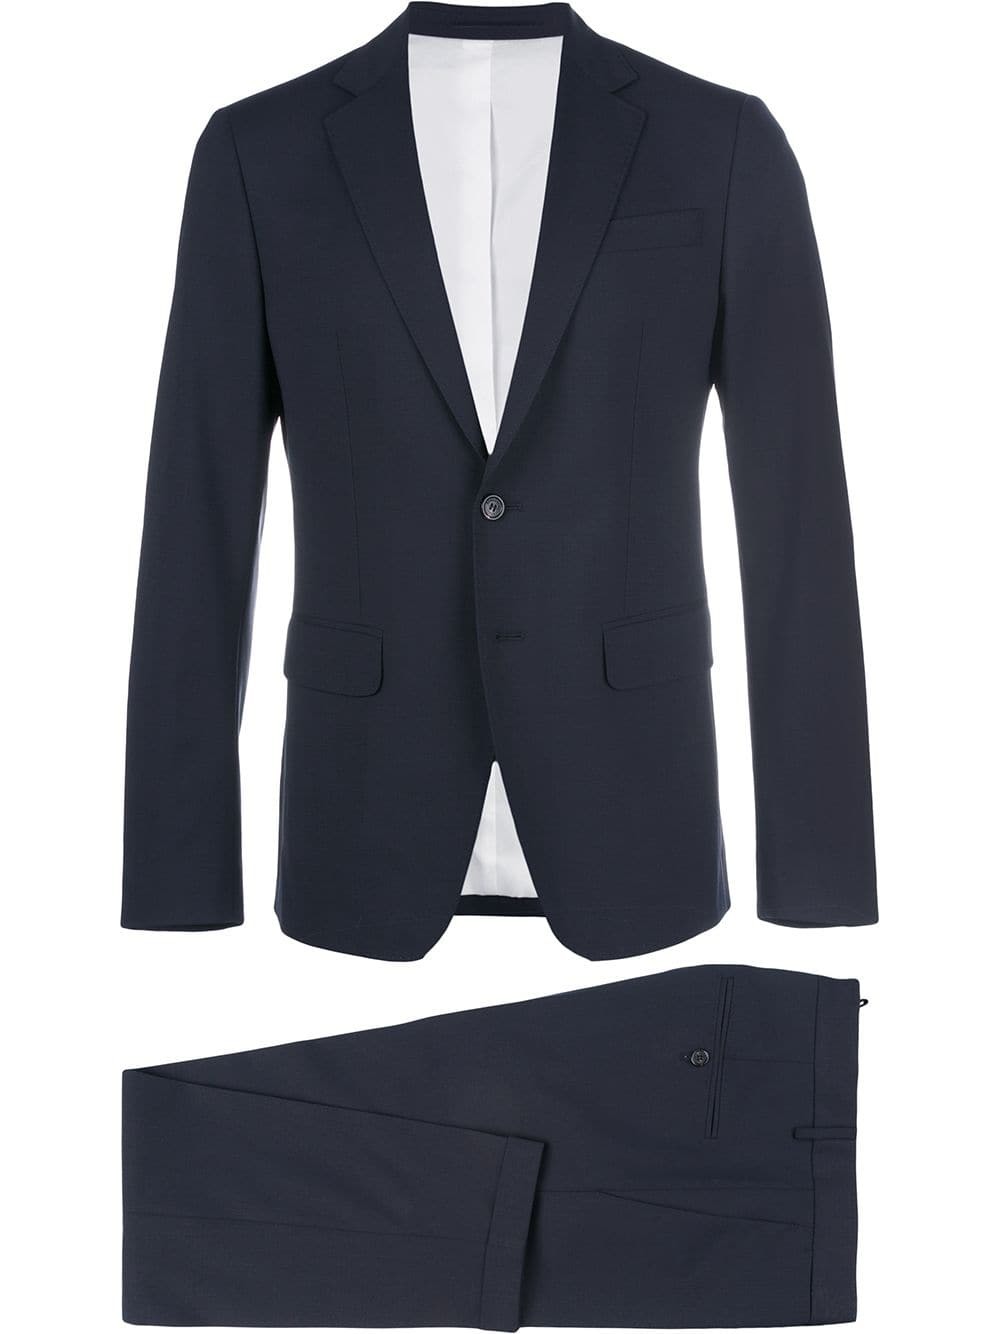 DSQUARED2 Manchester Suit, $1,520 | farfetch.com | Lookastic